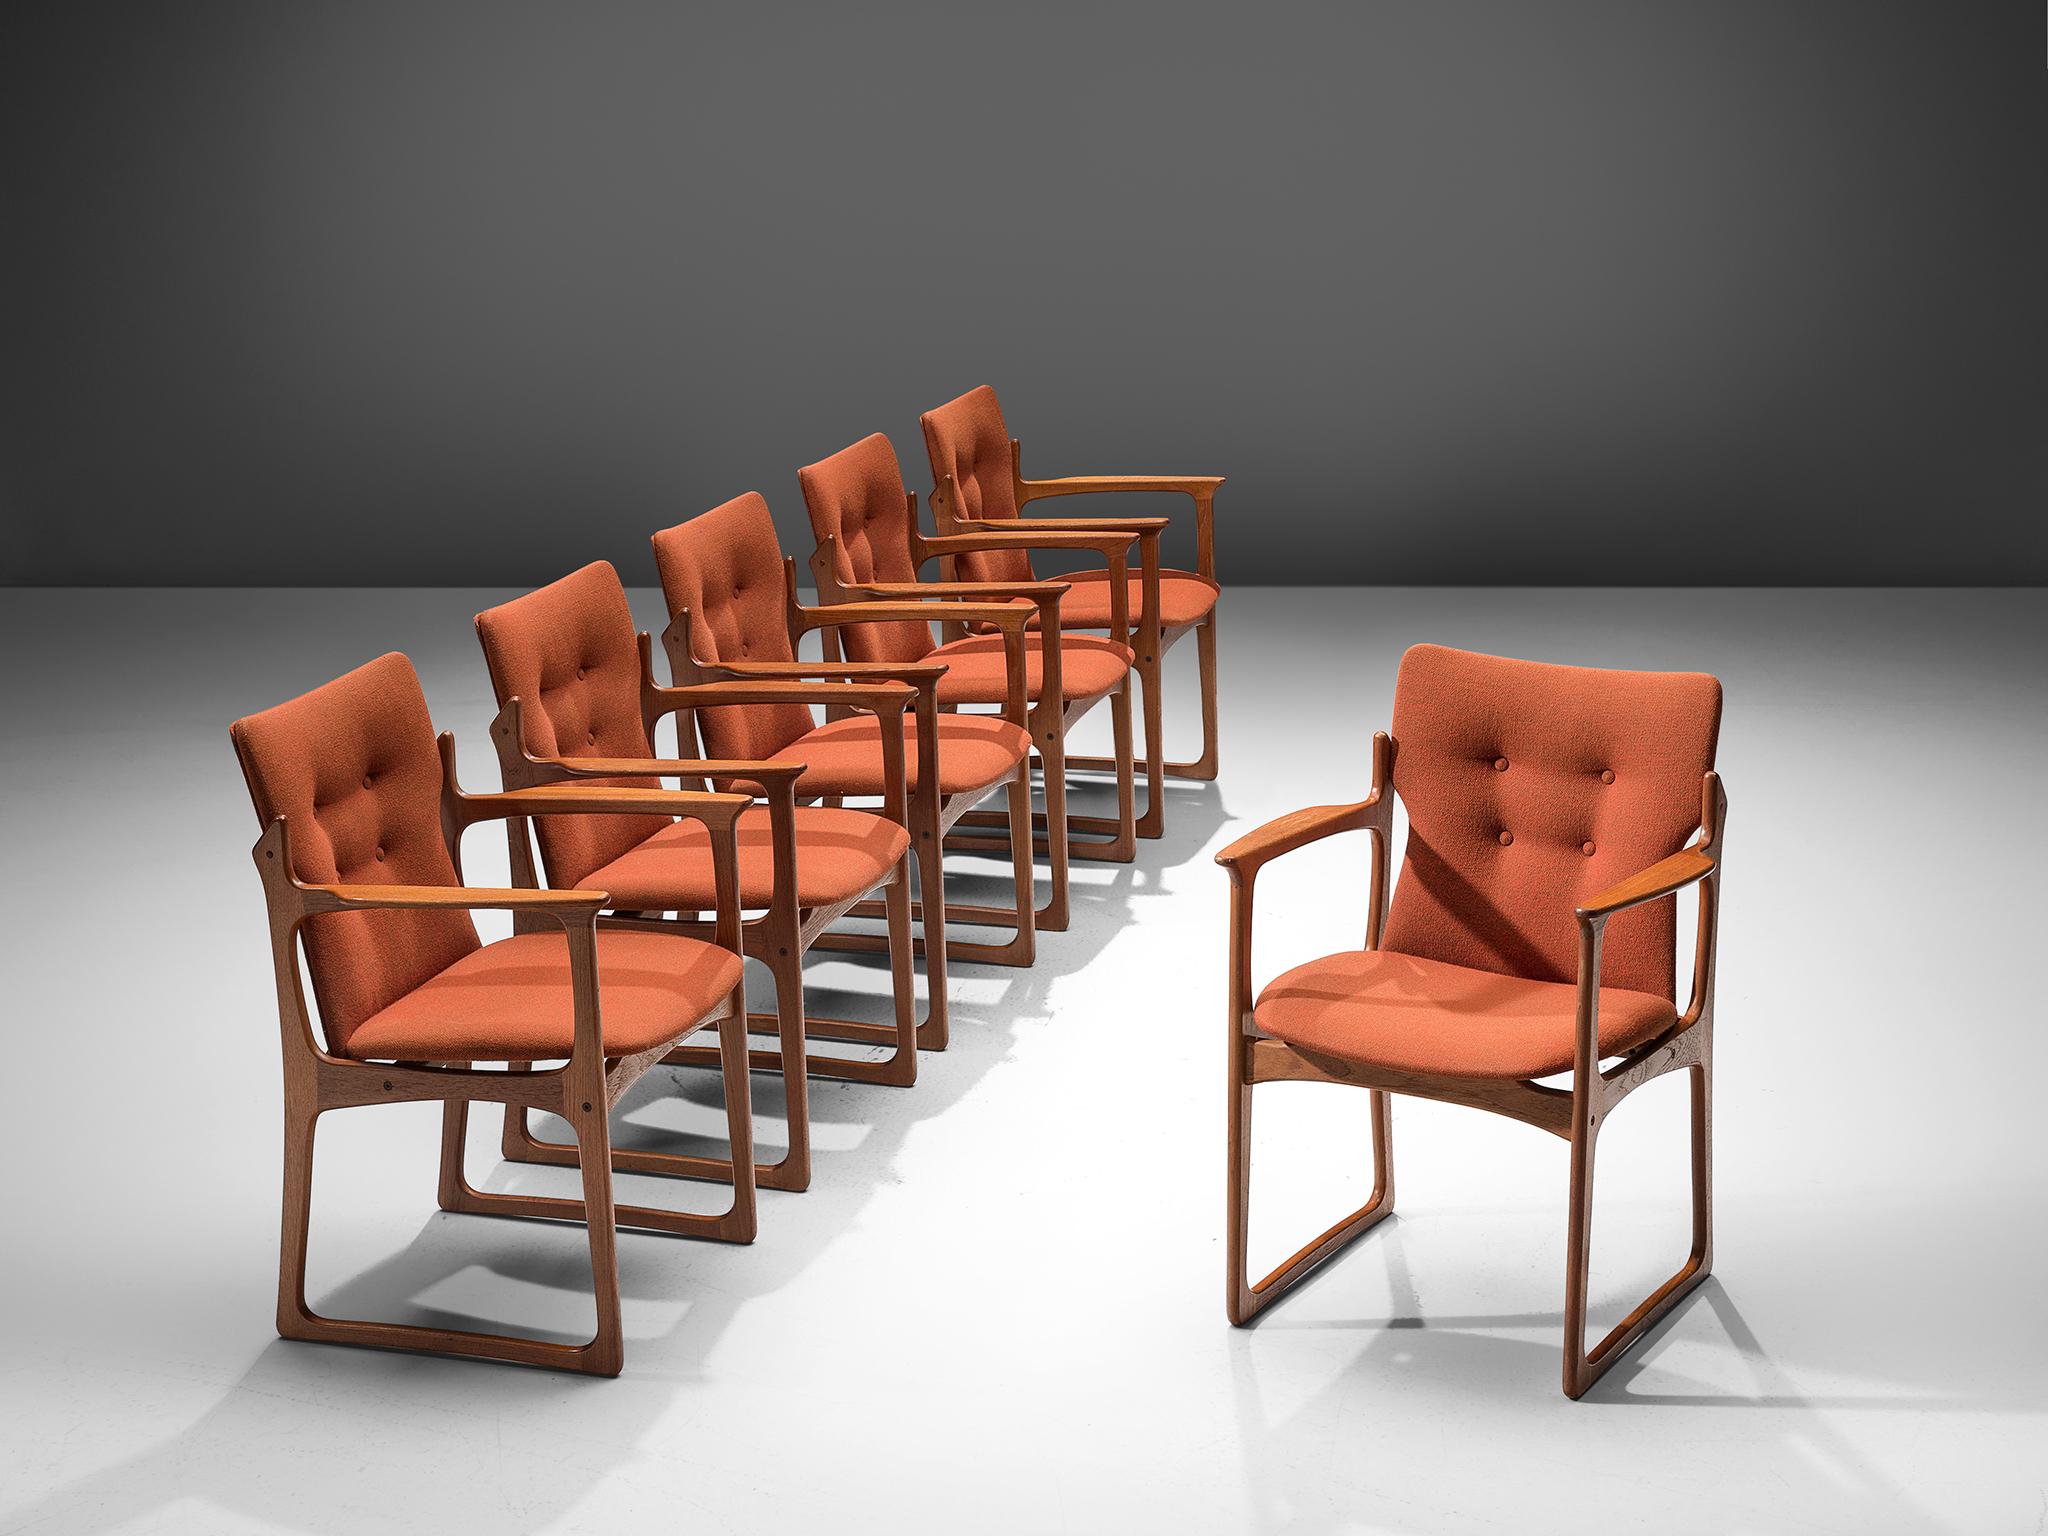 Vamdrup Stolefabrik, model 'VS 231', set of armchairs, teak and orange fabric, Denmark, 1960s. 

The armchairs with a solid teak frame, raise an attractive original orange upholstery seat. The frame shows subtle lines and beautiful curves of the